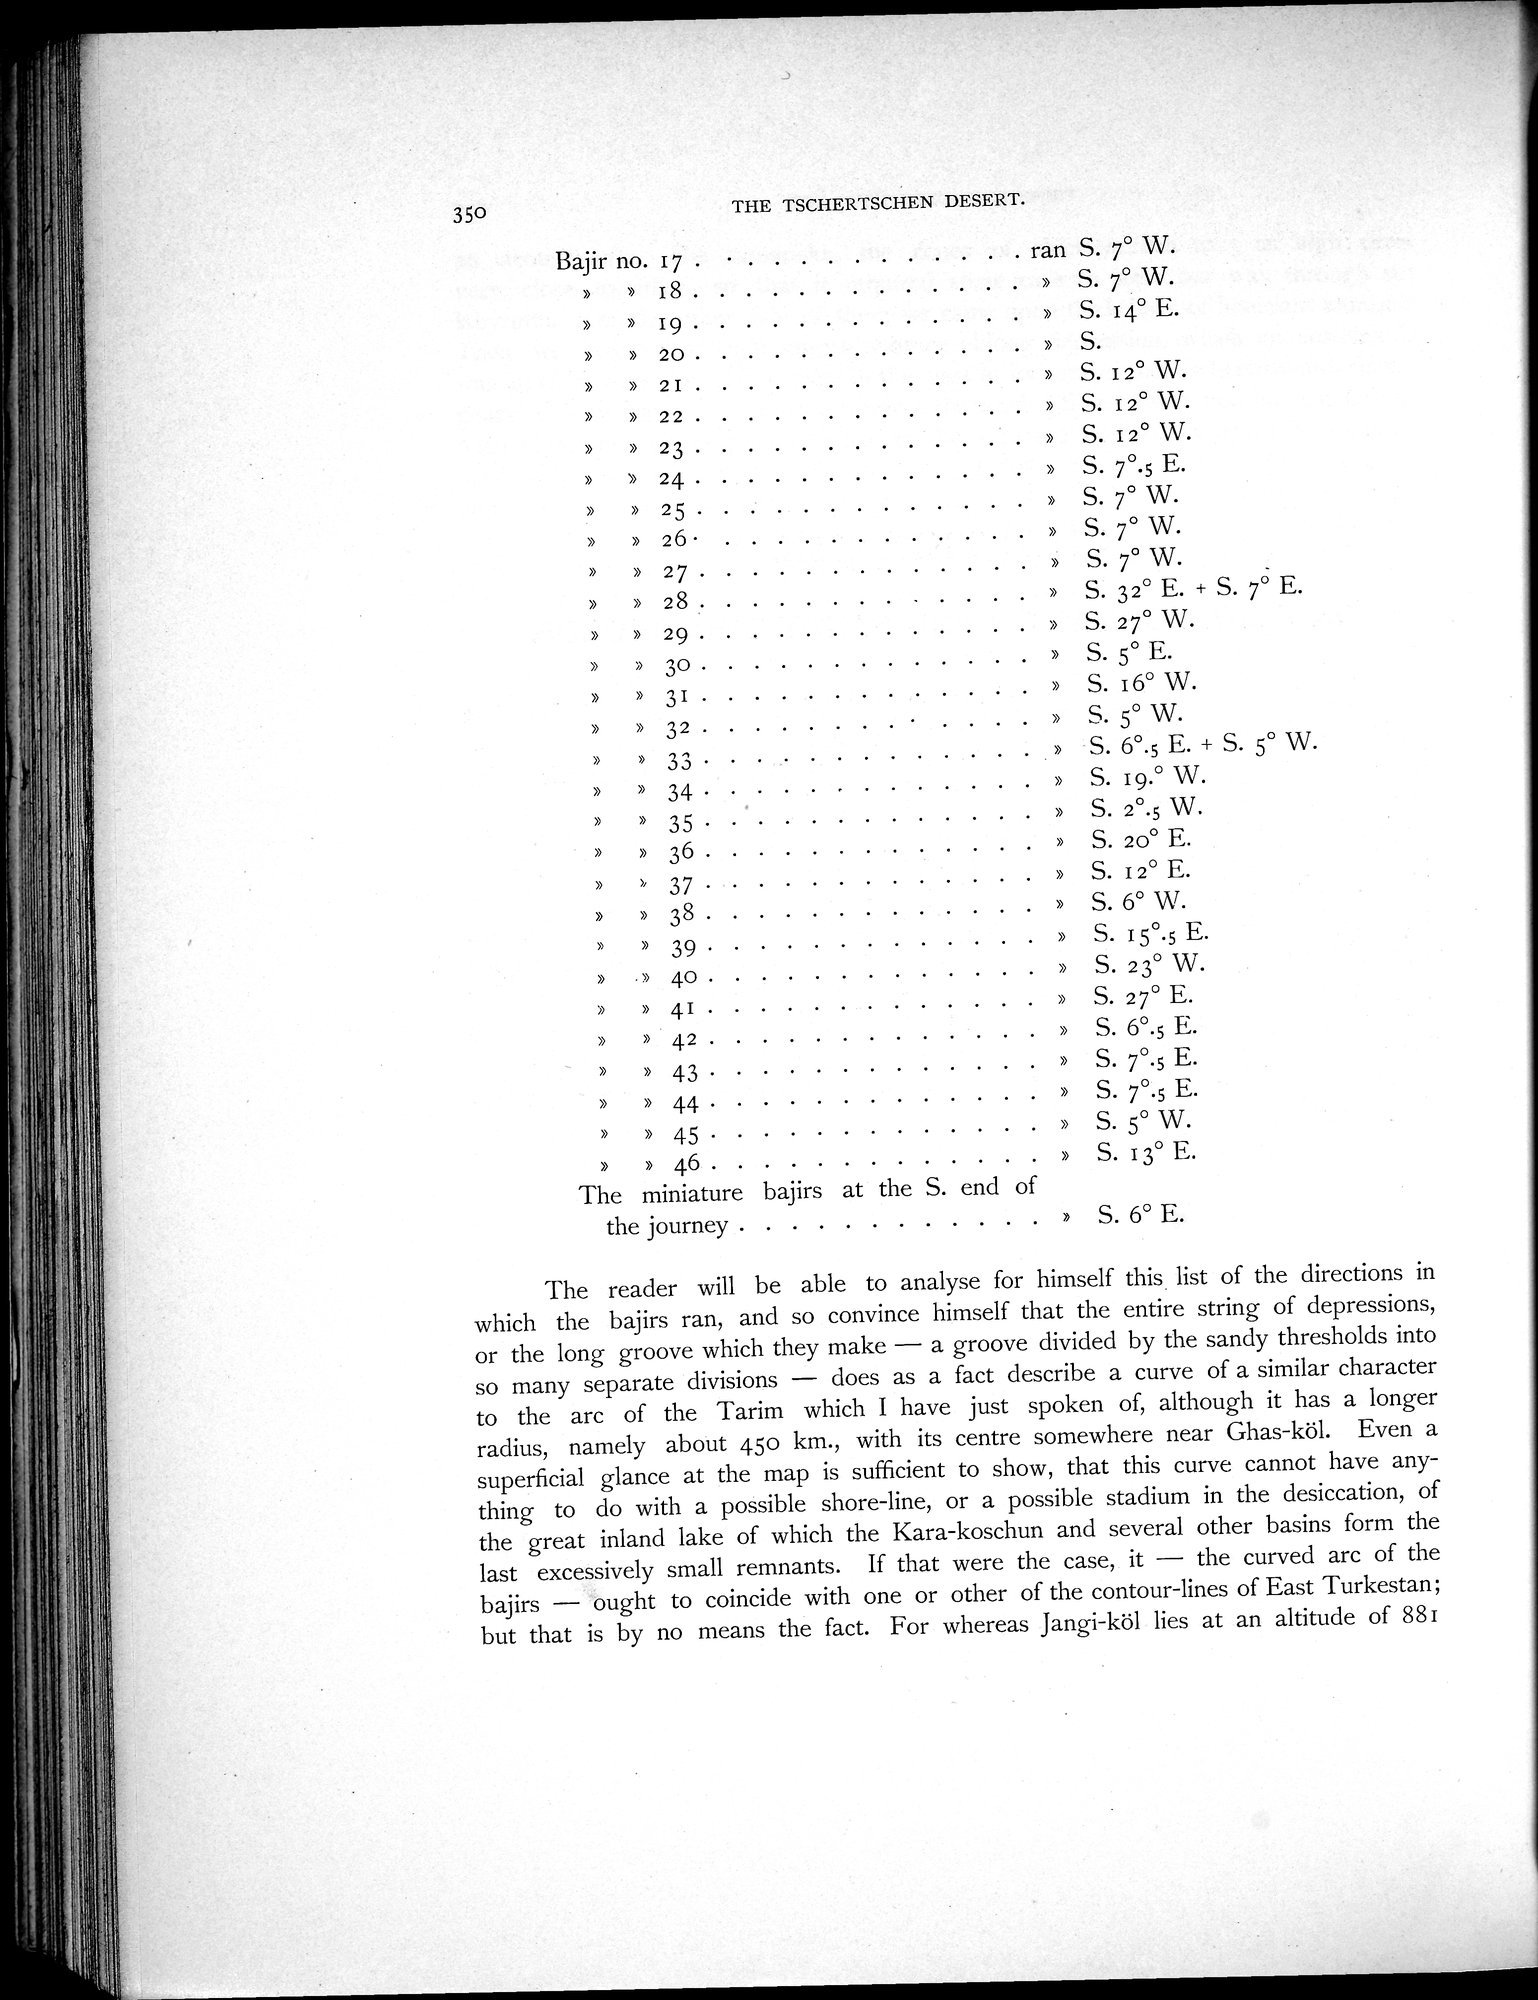 Scientific Results of a Journey in Central Asia, 1899-1902 : vol.1 / 470 ページ（白黒高解像度画像）